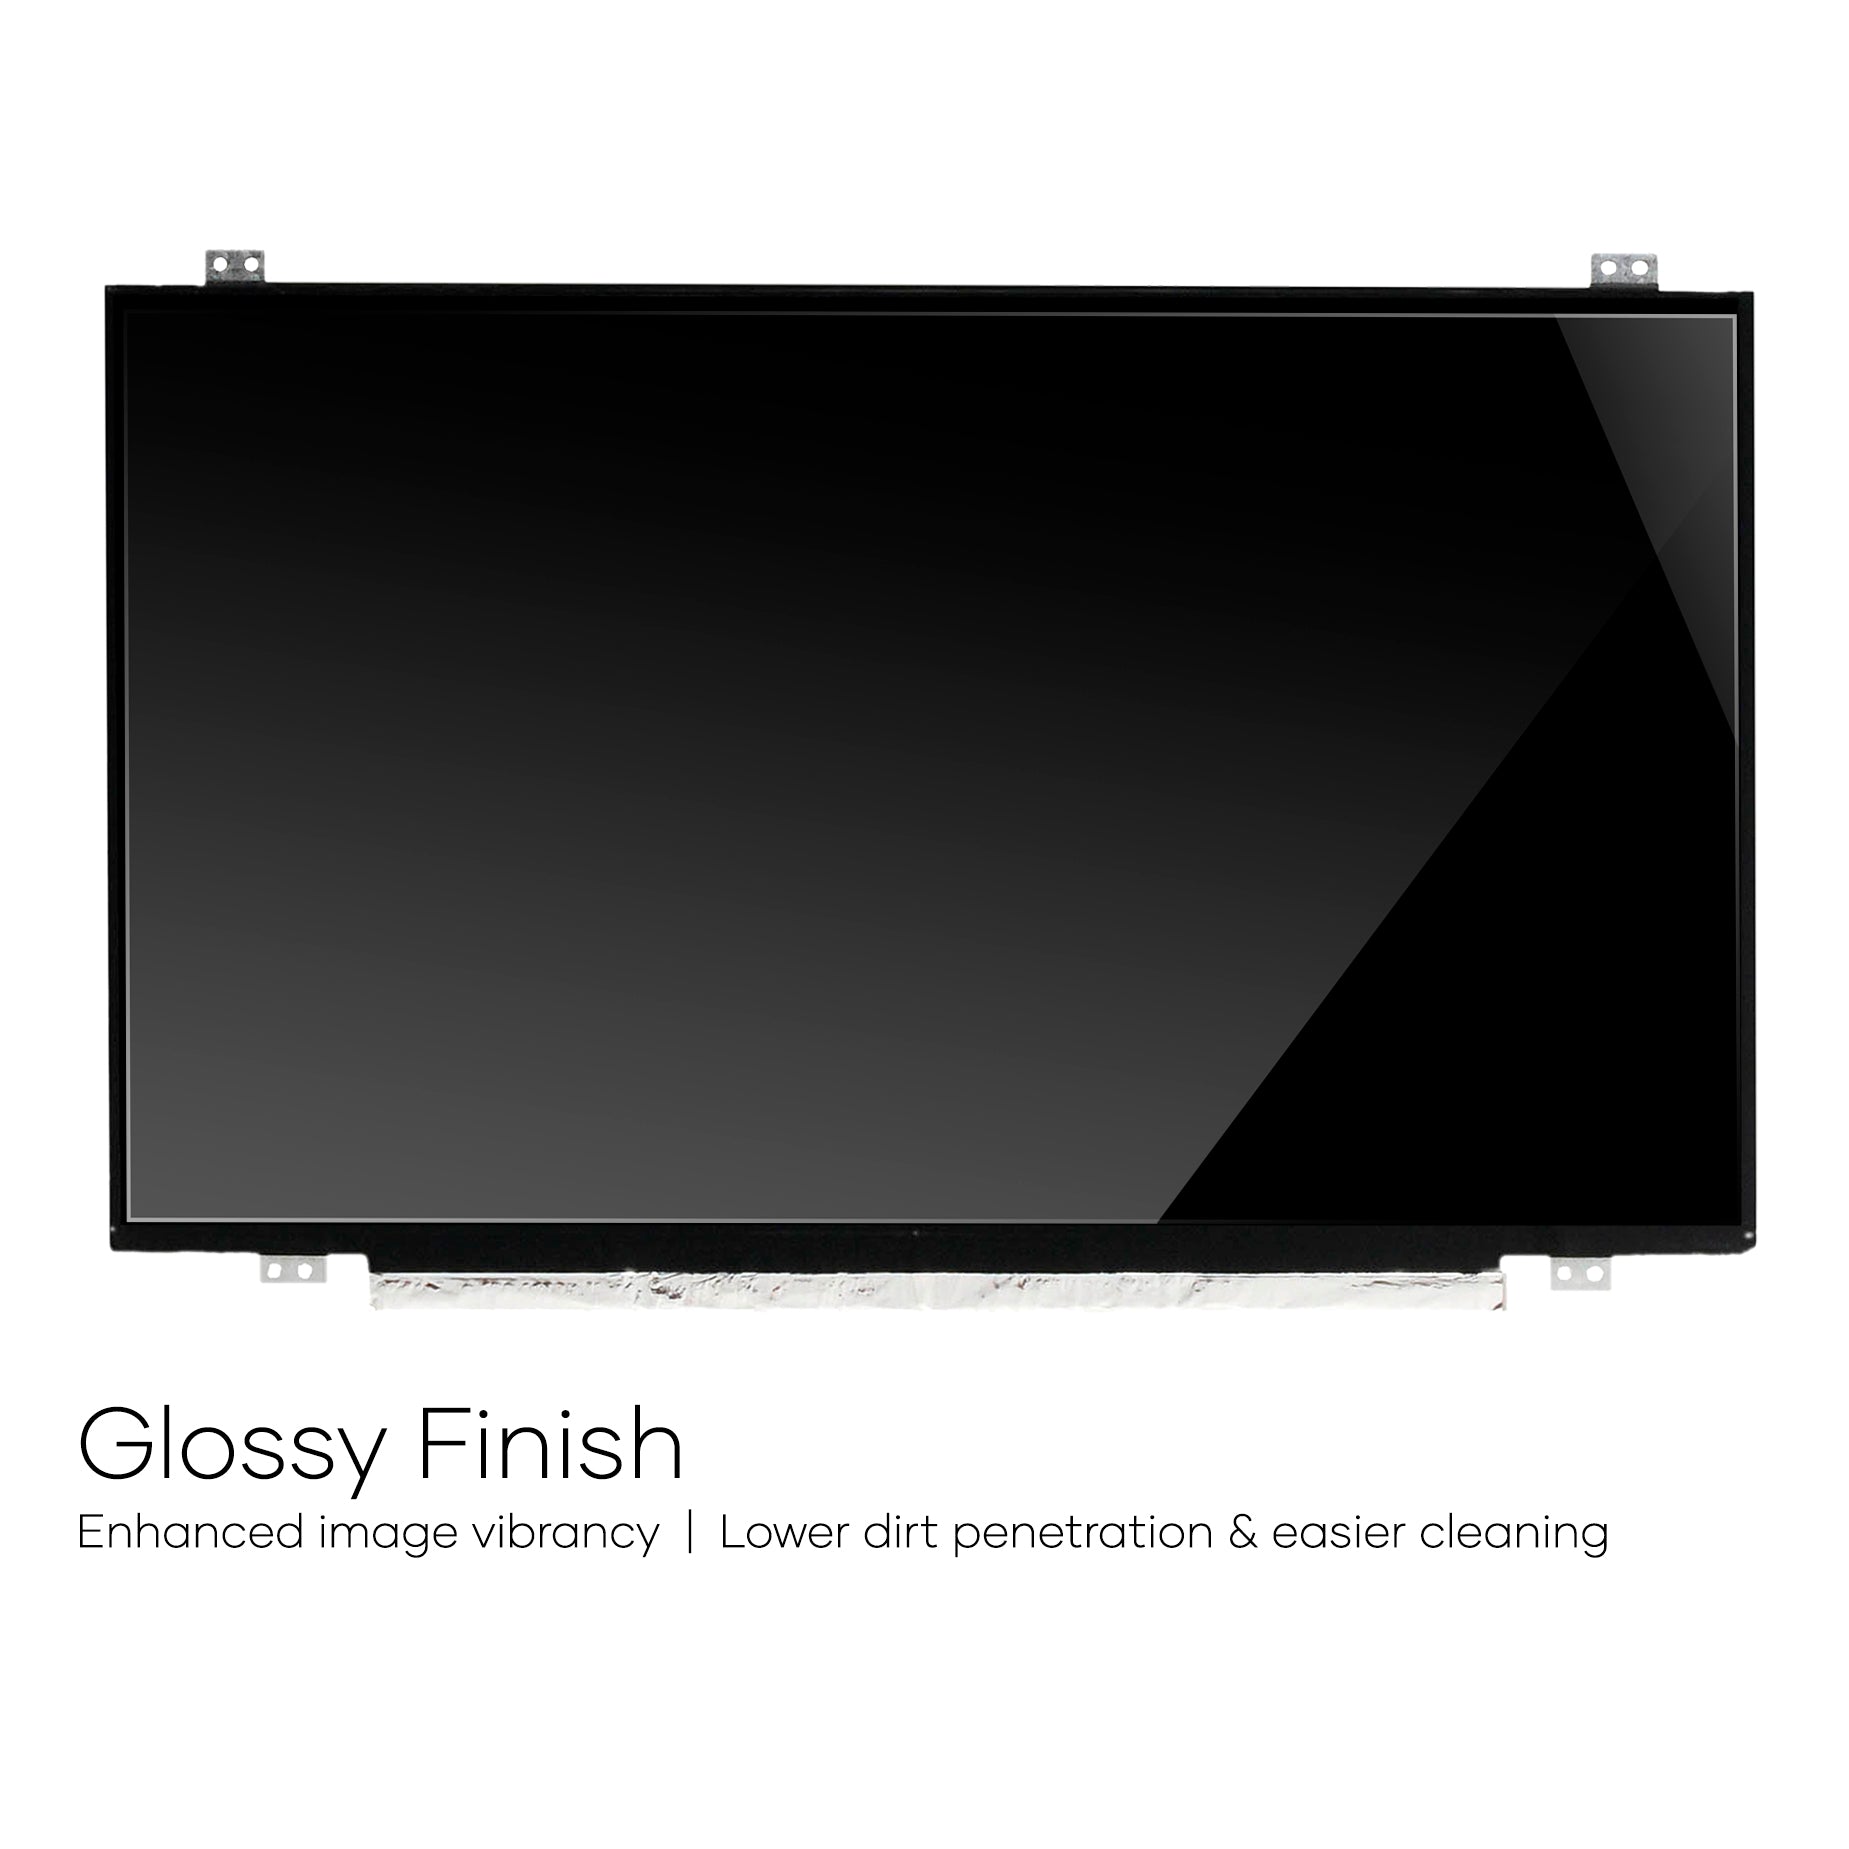 Screen Replacement for N140BGE-E43 REV.C1 HD 1366x768 Glossy LCD LED Display